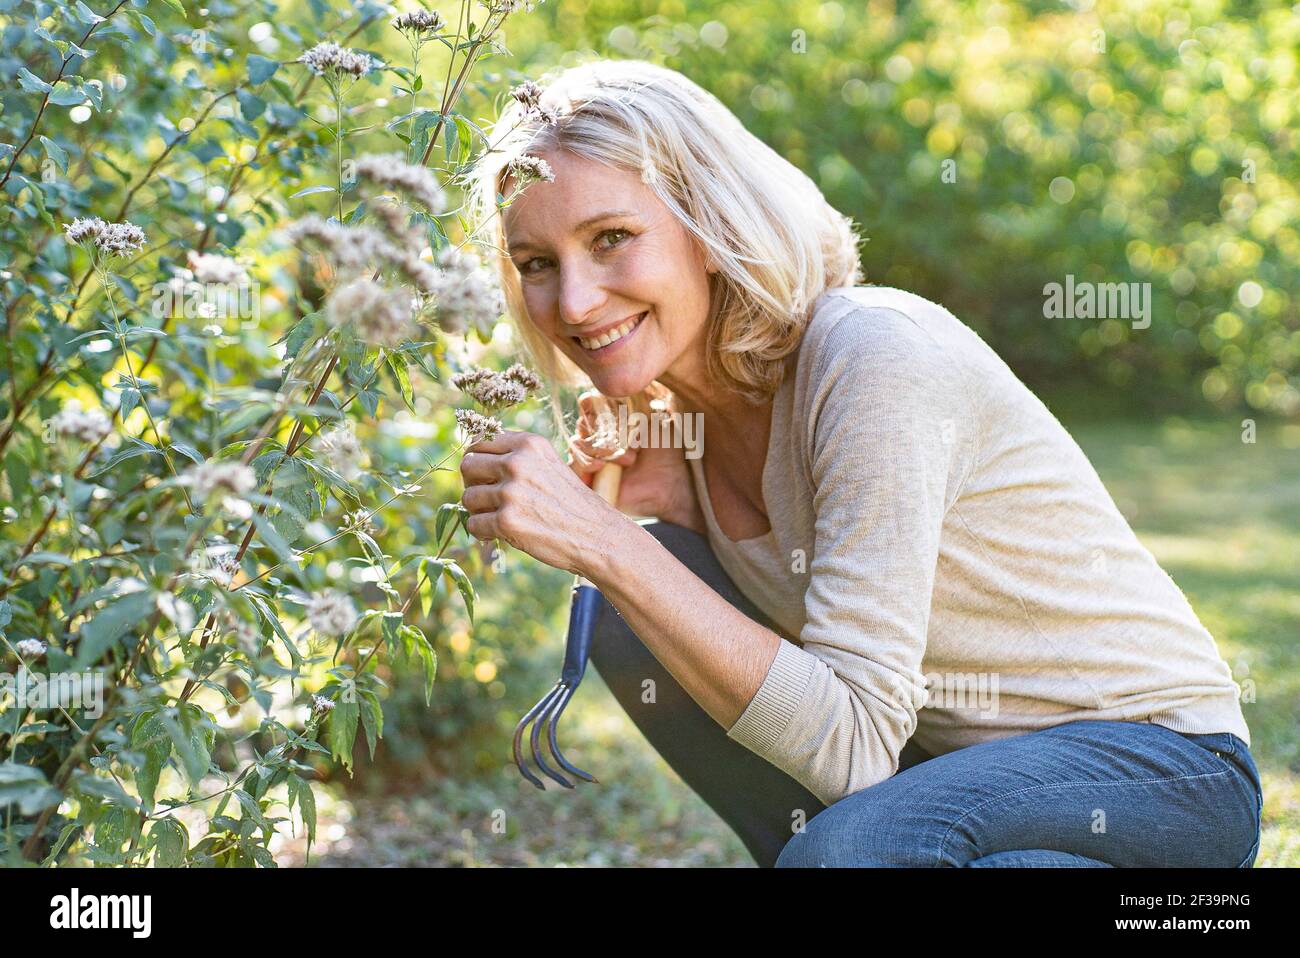 Portrait of smiling mature woman smelling flowers in backyard Stock Photo